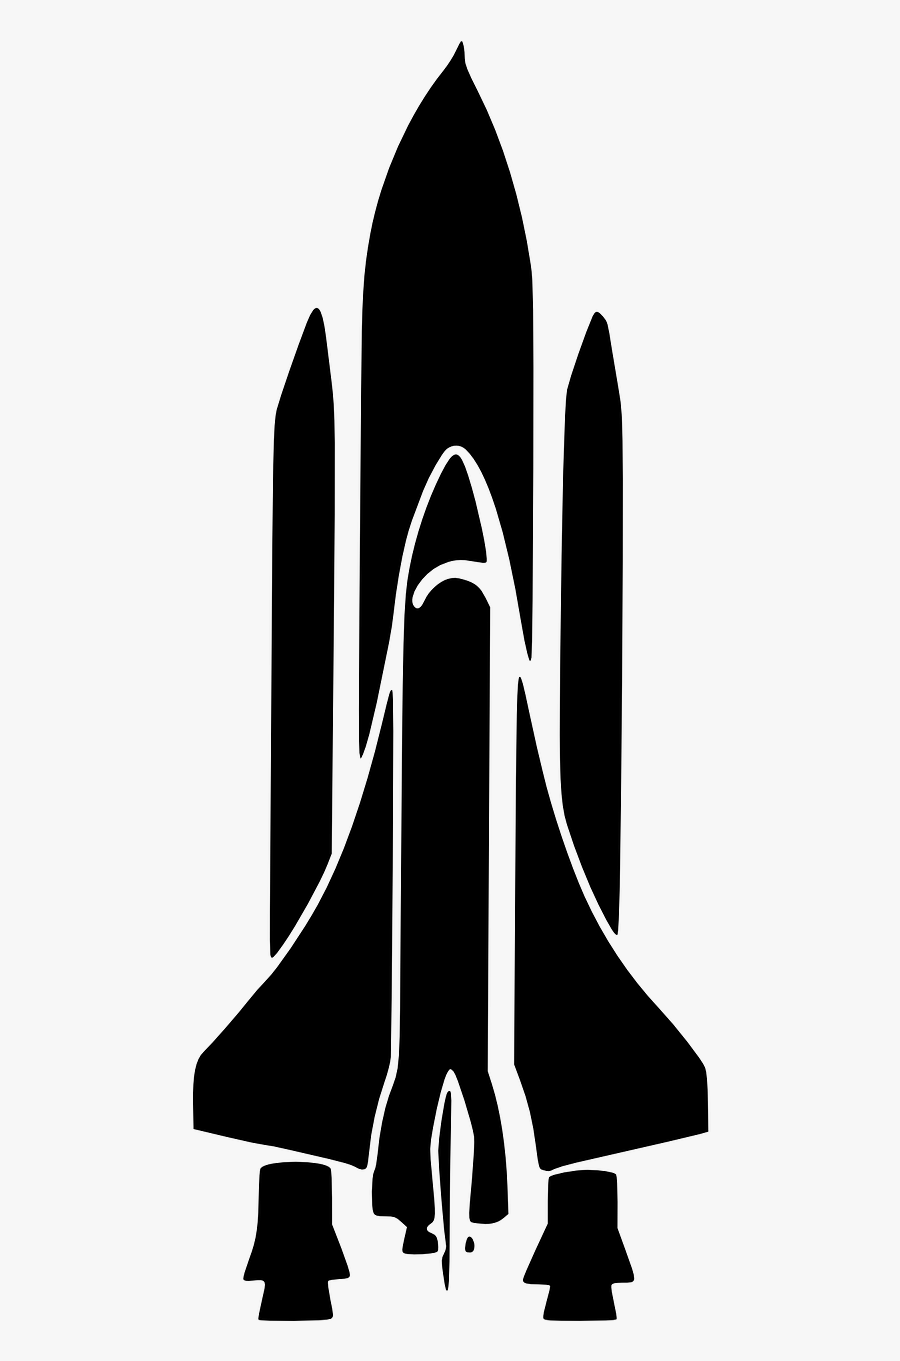 Space Shuttle Nasa Rocket Free Photo - Space Silhouette Png, Transparent Clipart